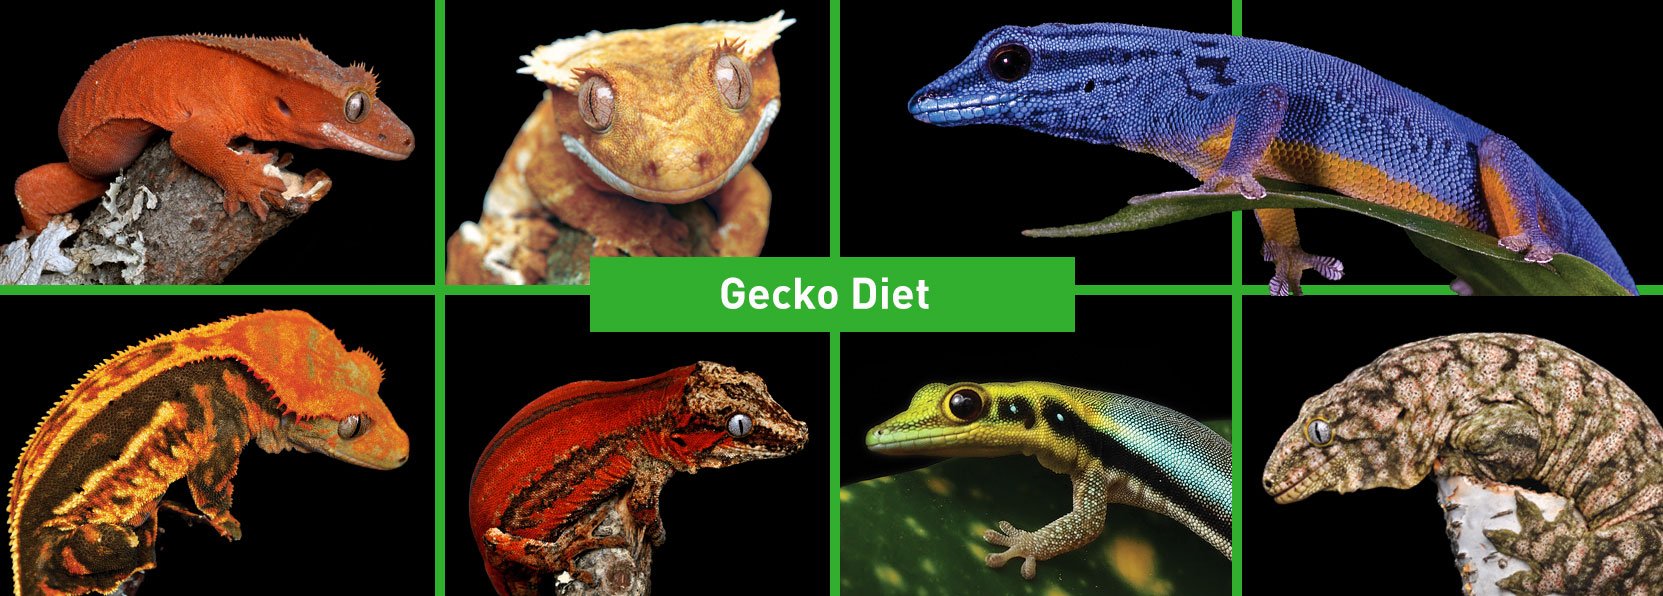 Gecko-Diets-Products-banner_m5cd-ik